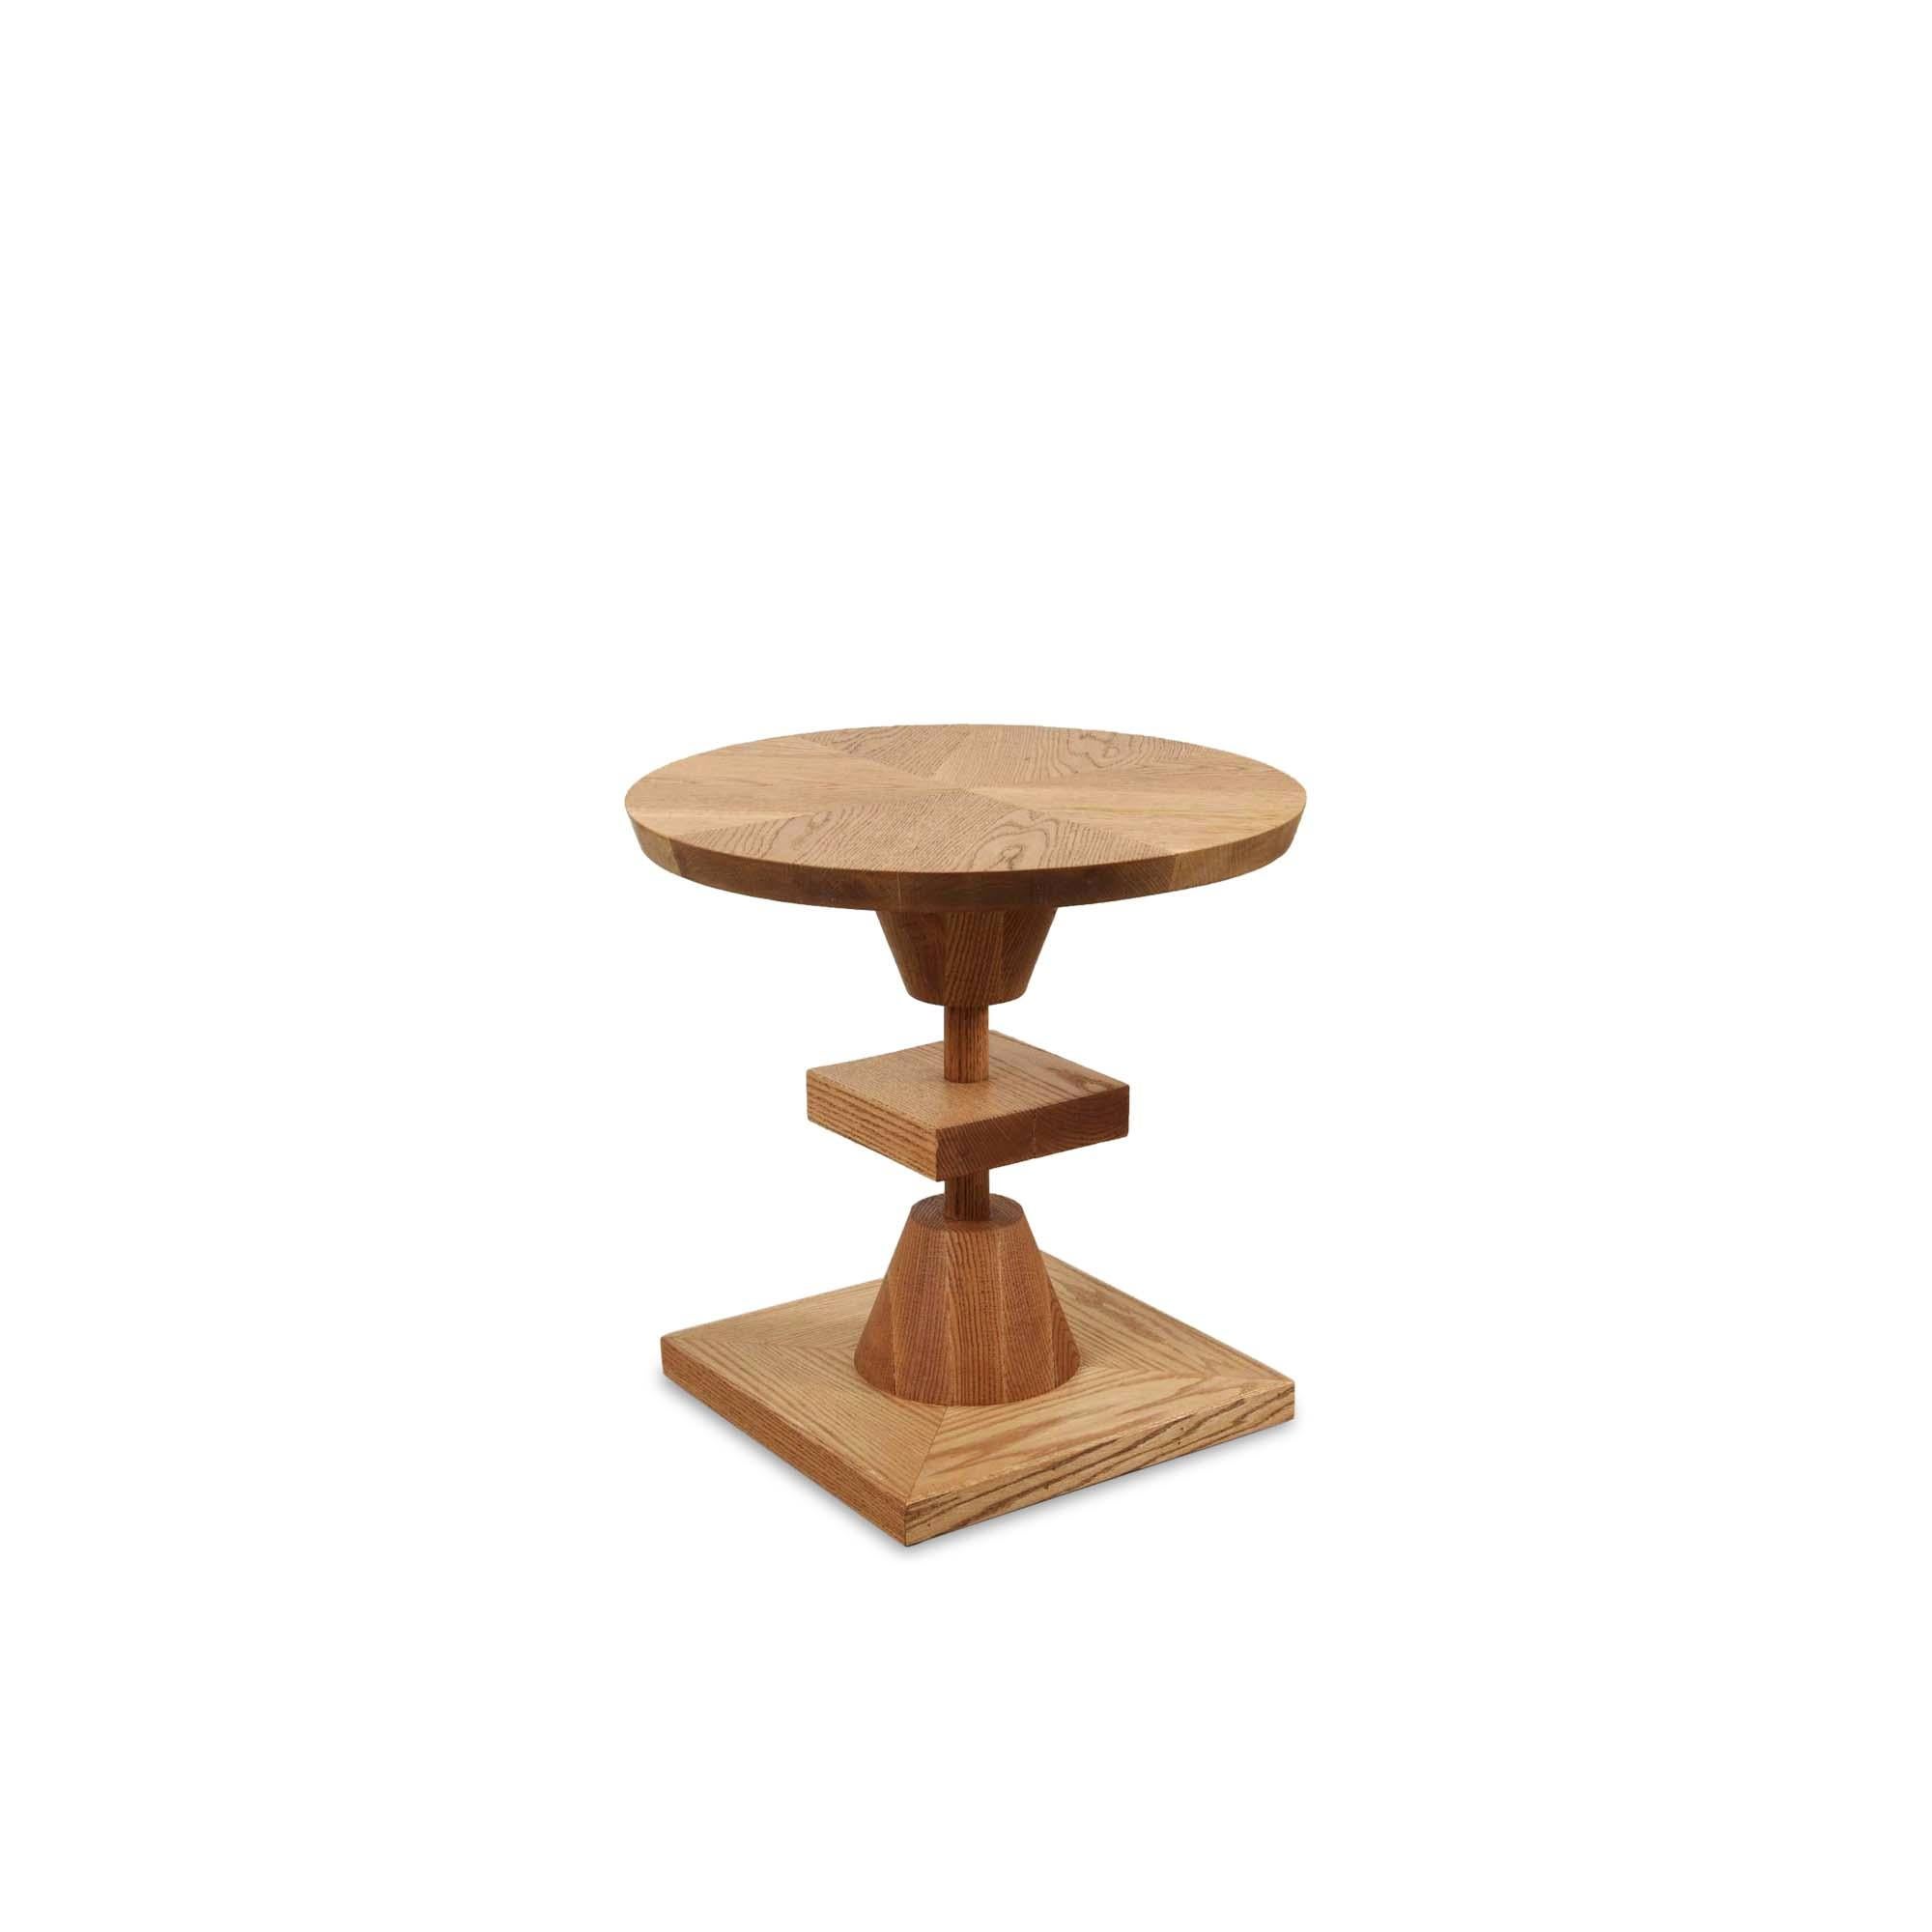 Oiled oak morro table by Lawson-Fenning. The Morro table features a series of geometric shapes stacked on top of each other with solid wood details. Available in American walnut or white oak. 

The Lawson-Fenning Collection is designed and handmade